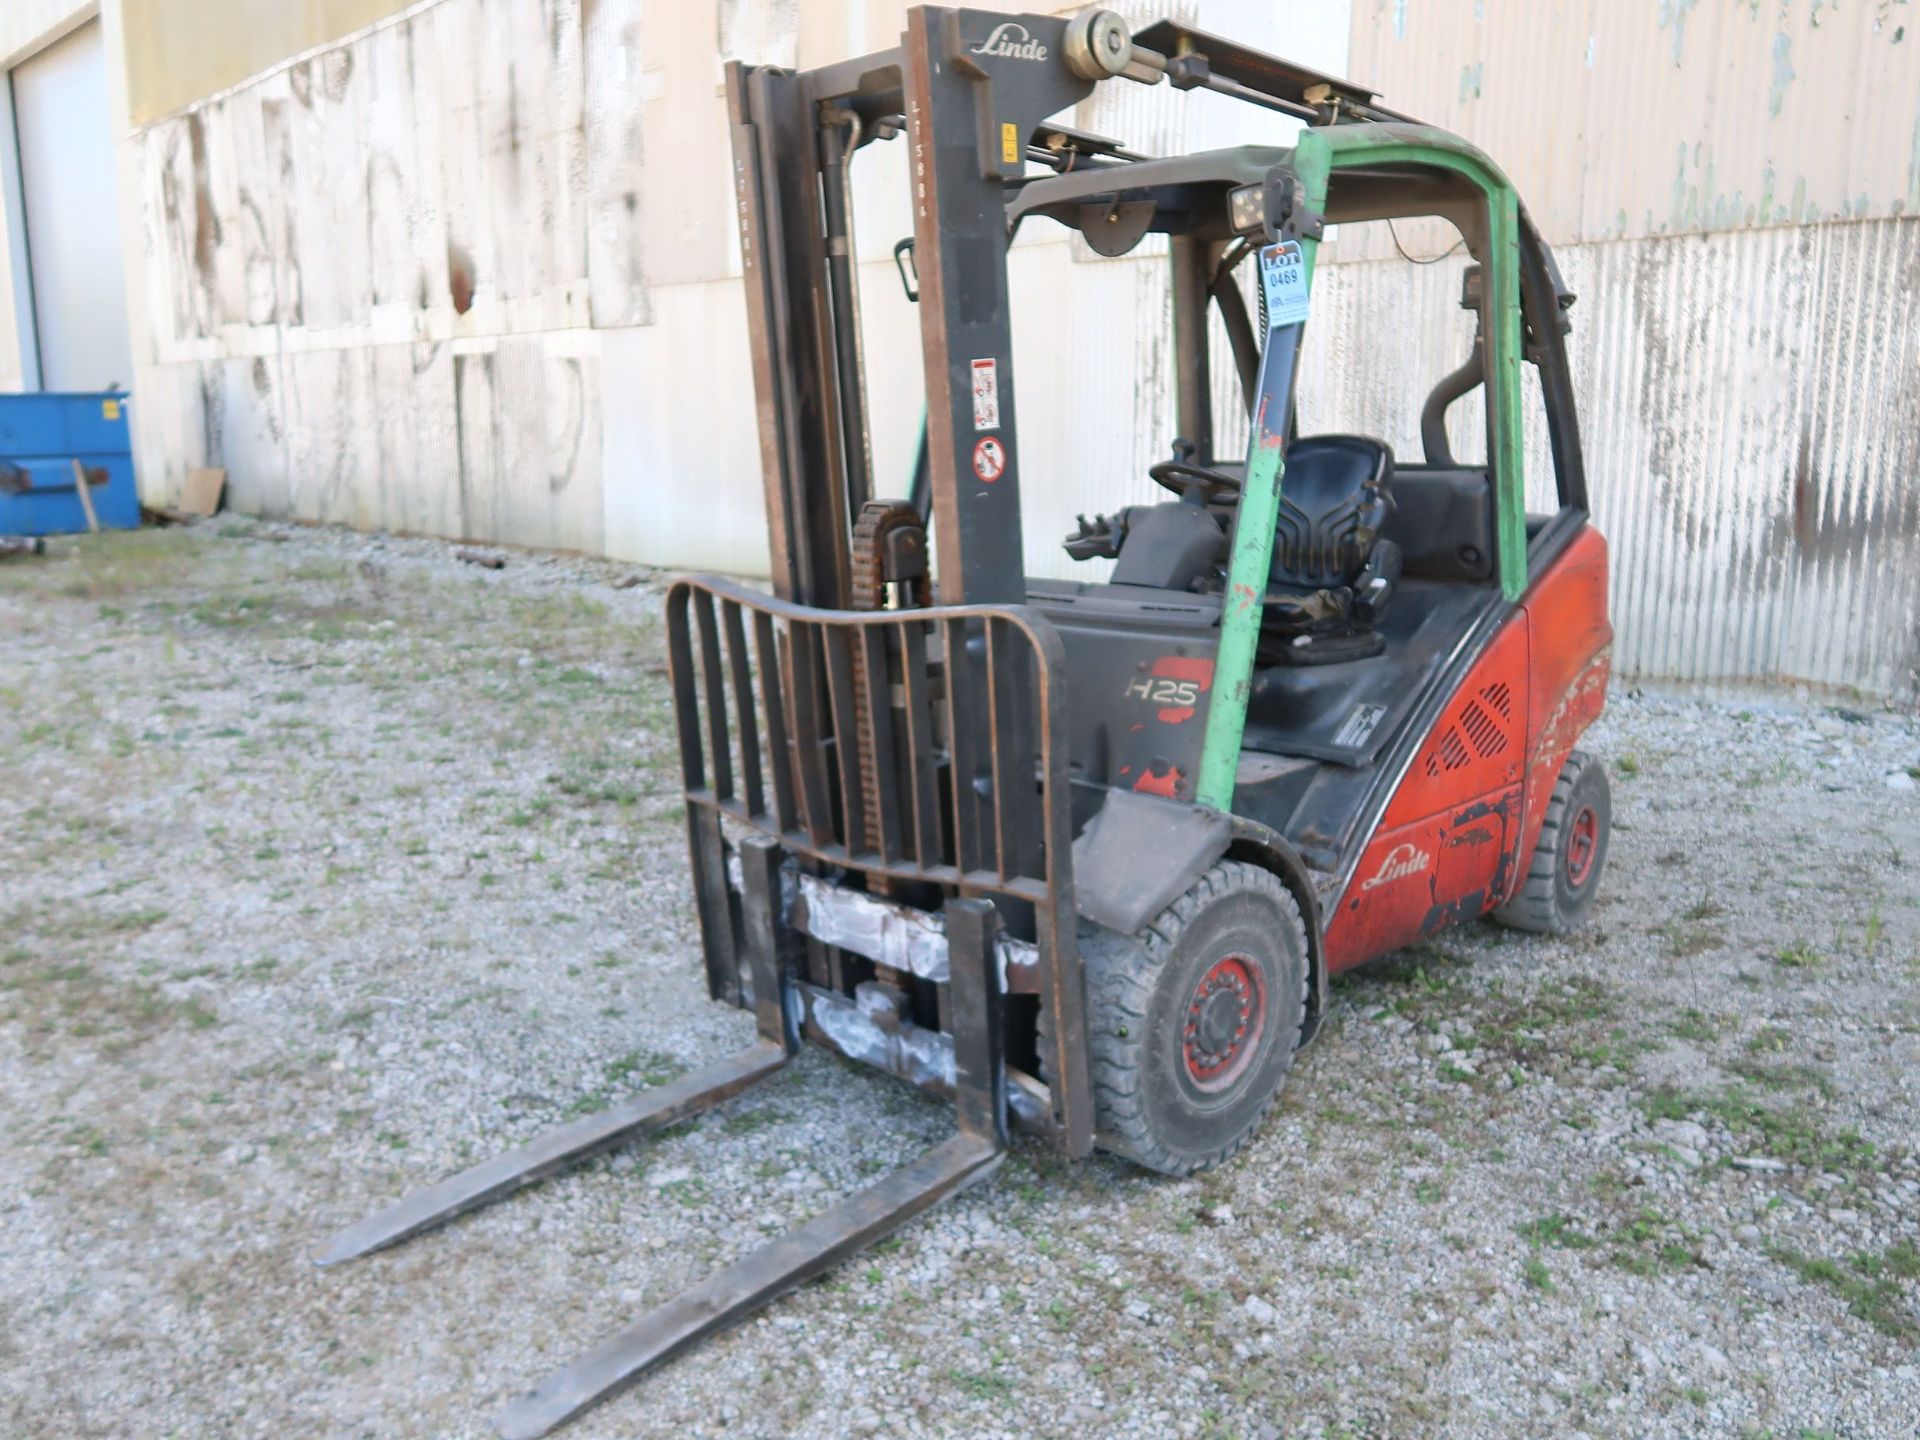 5,000 LB. LINDE MODEL H25D DIESEL POWERED SOLID PNEUMATIC TIRE LIFT TRUCK; S/N 05886, 2-STAGE